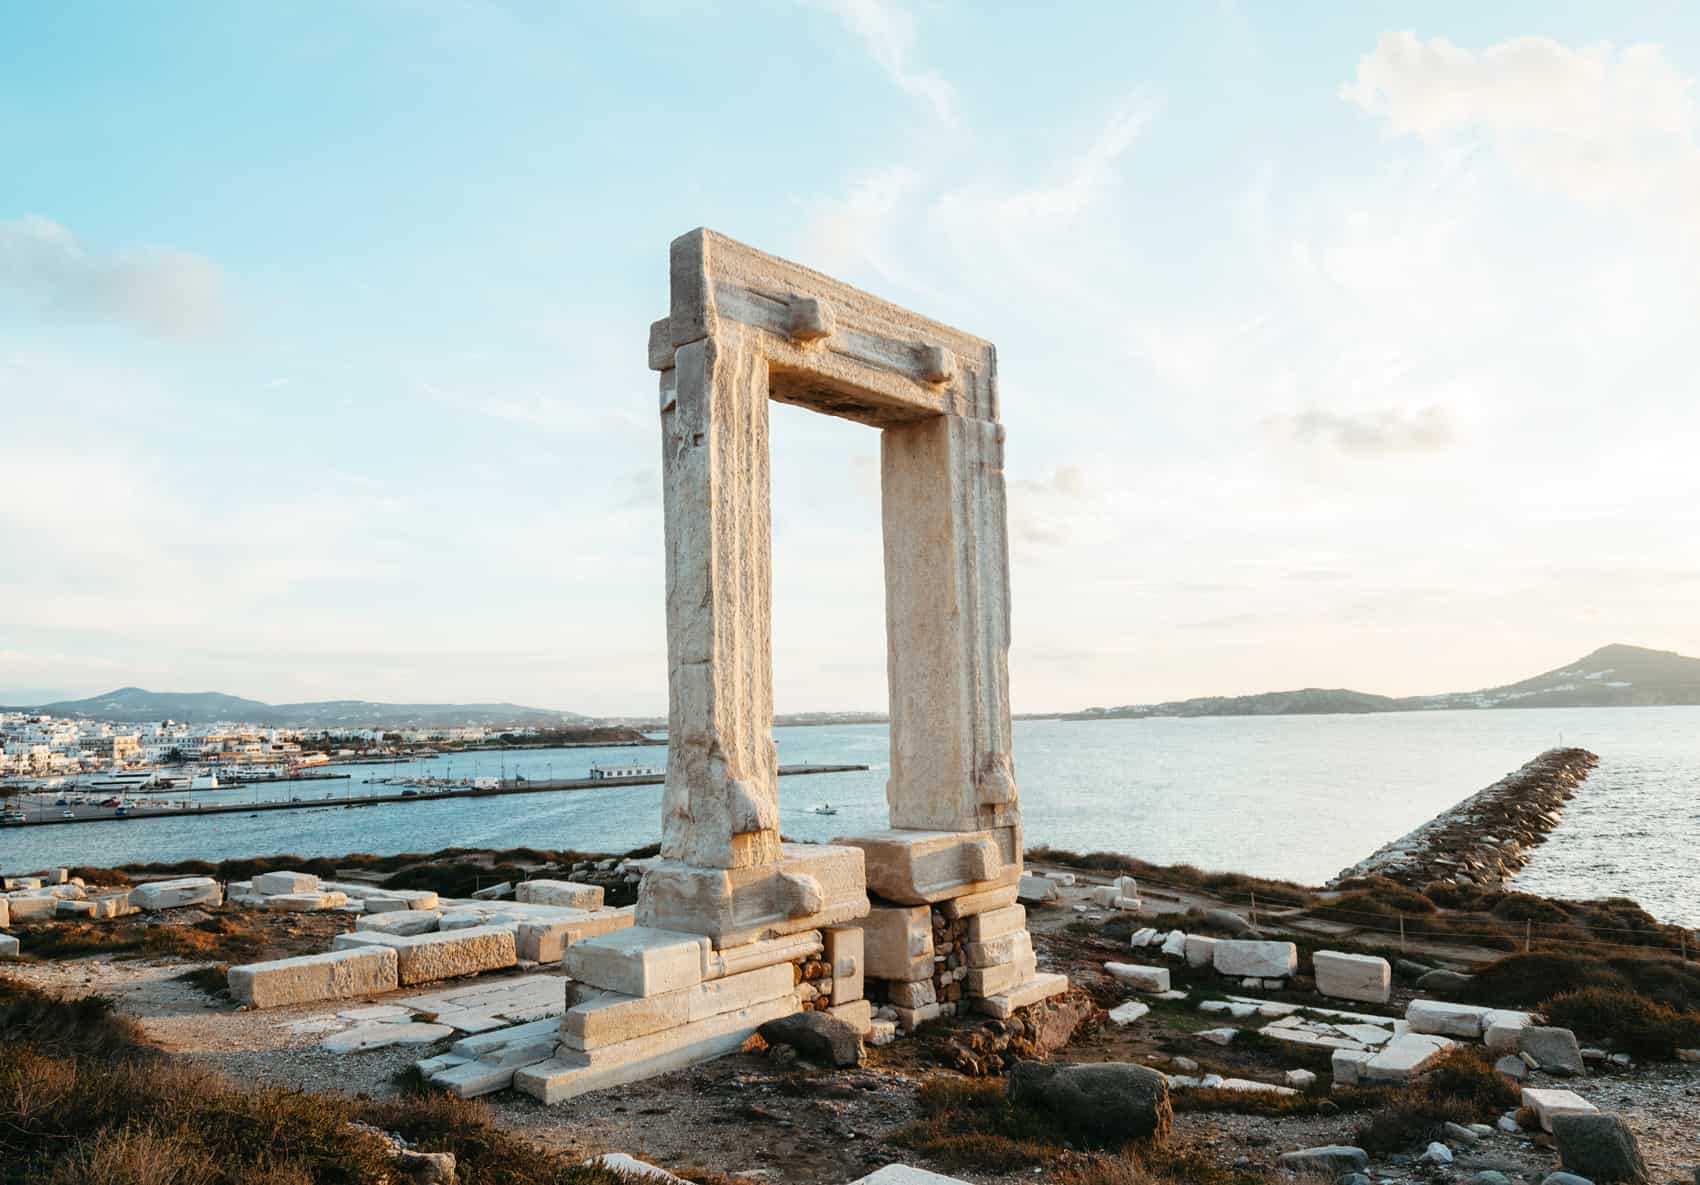 Portara in Naxos, also called the Temple of Apollo in Greece. You can see Naxos Port and the ocean in the background